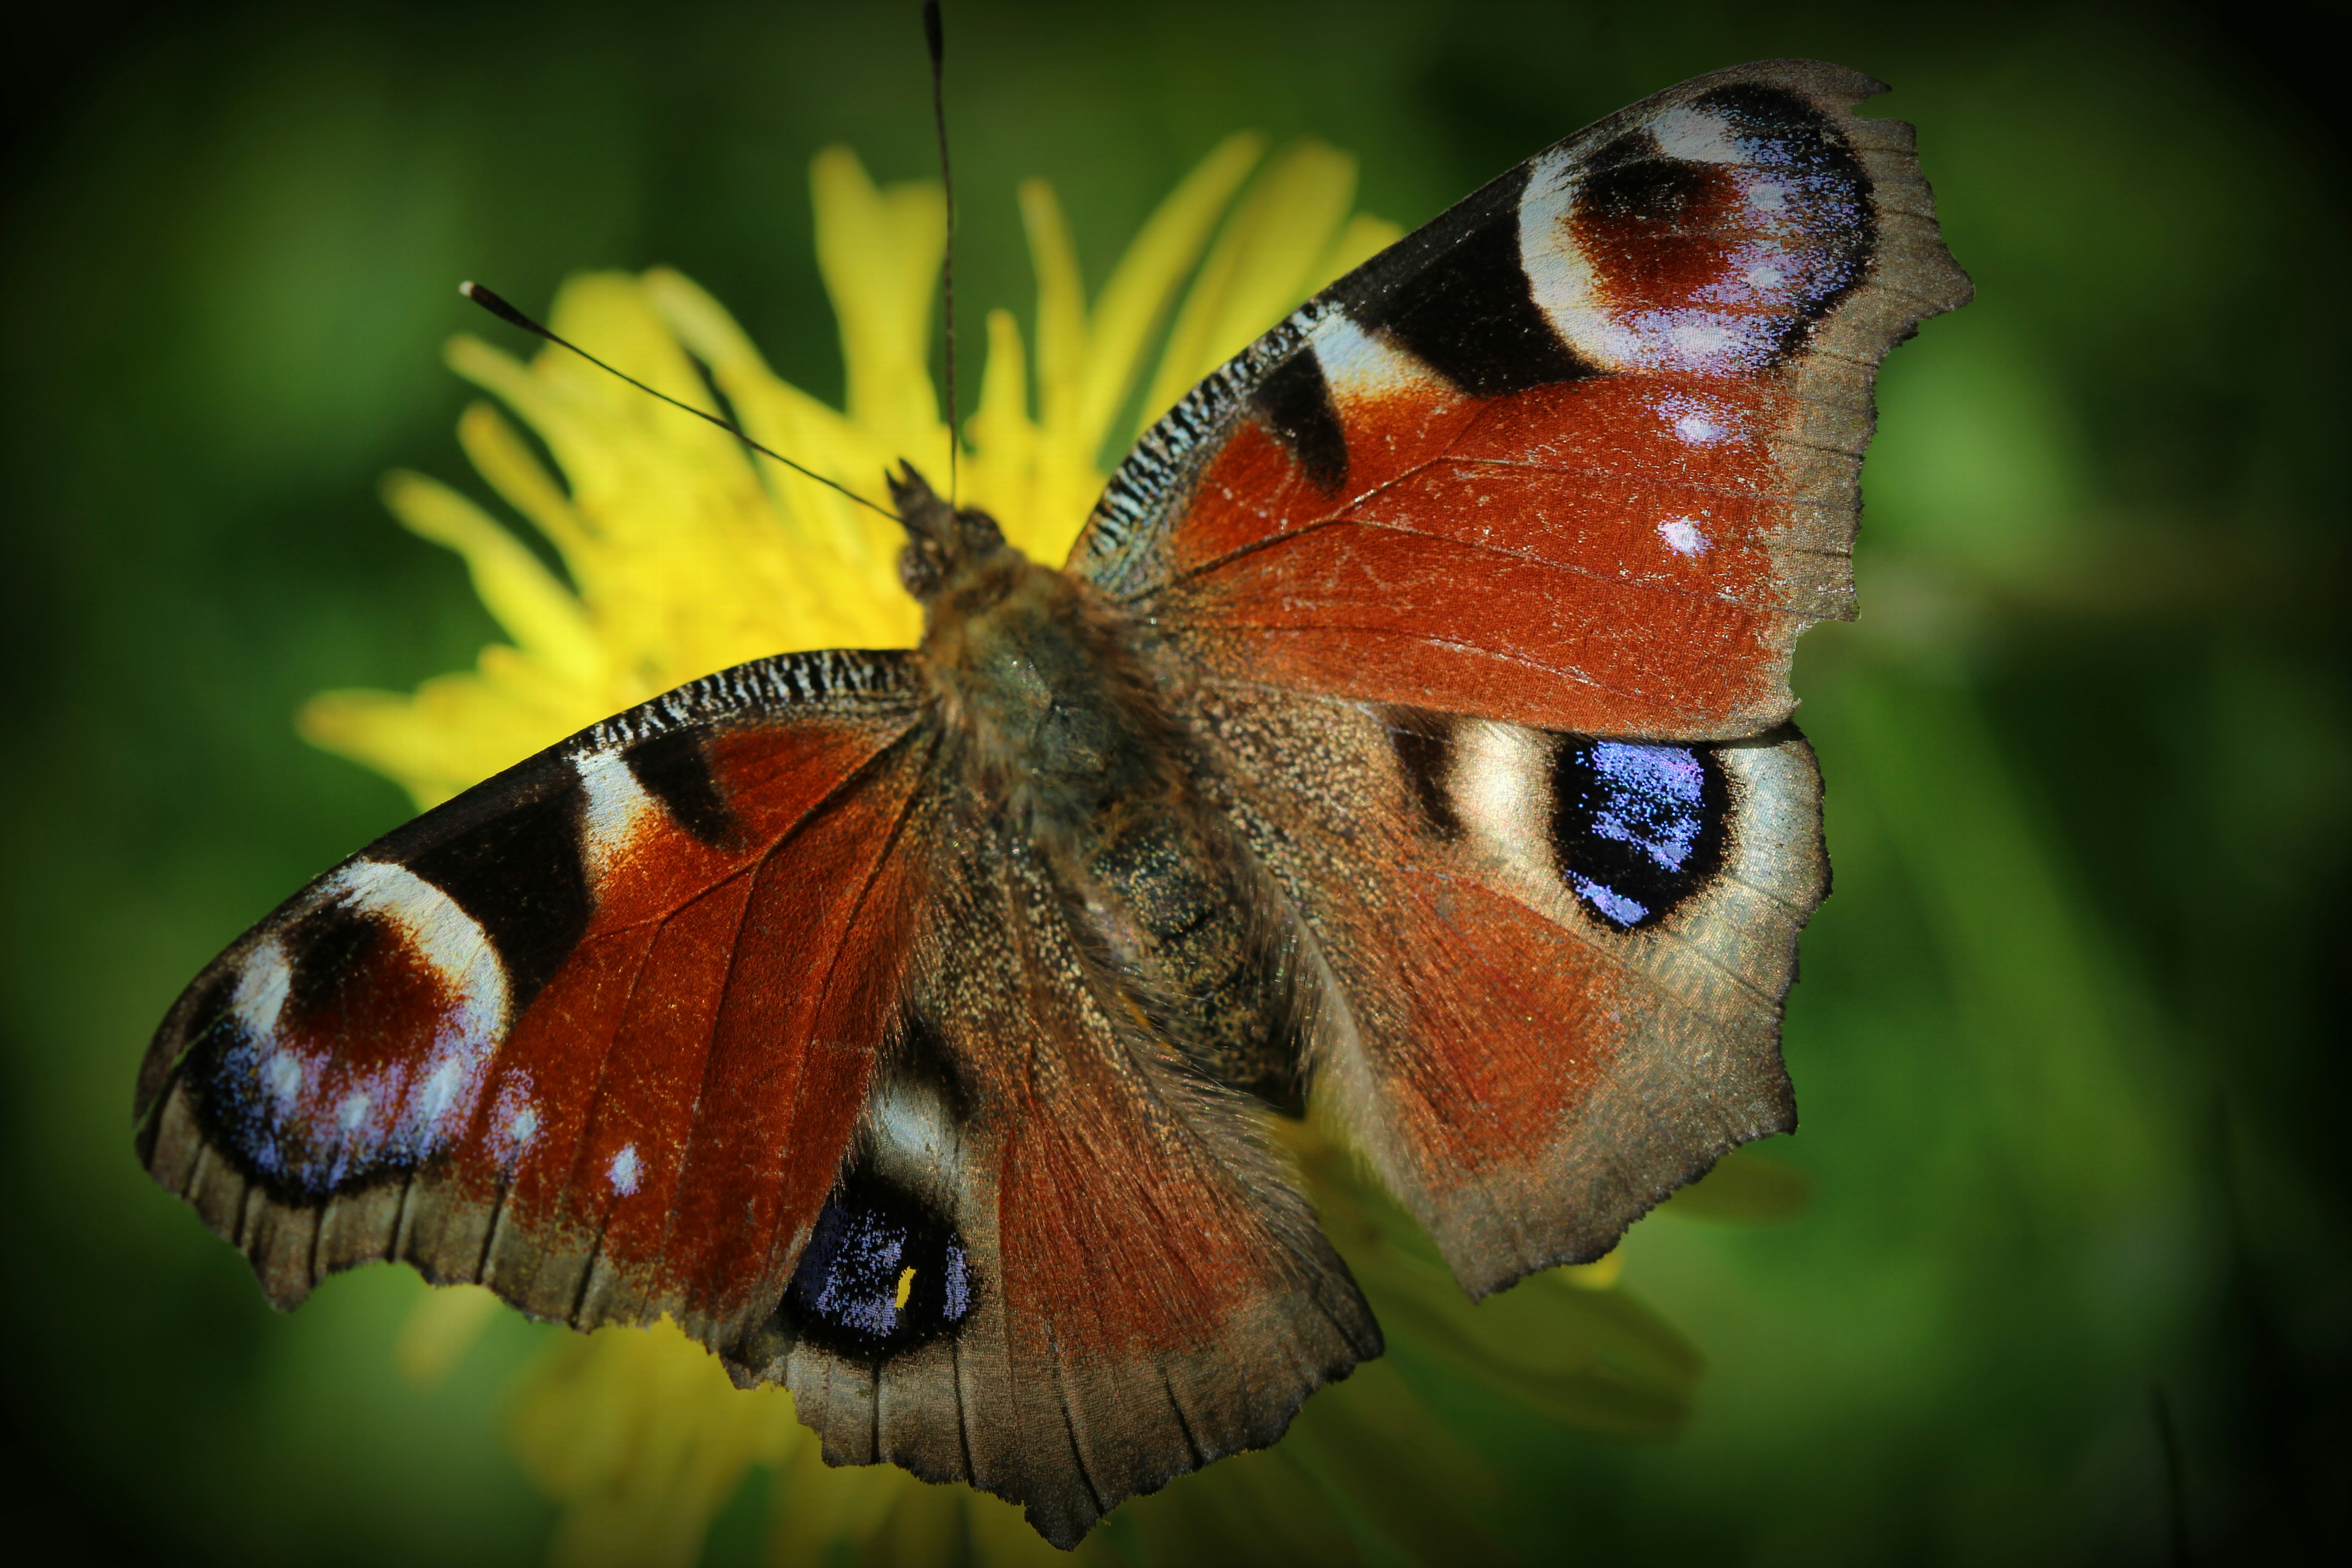 peacock butterfly perched on yellow flower in close up photography during daytime